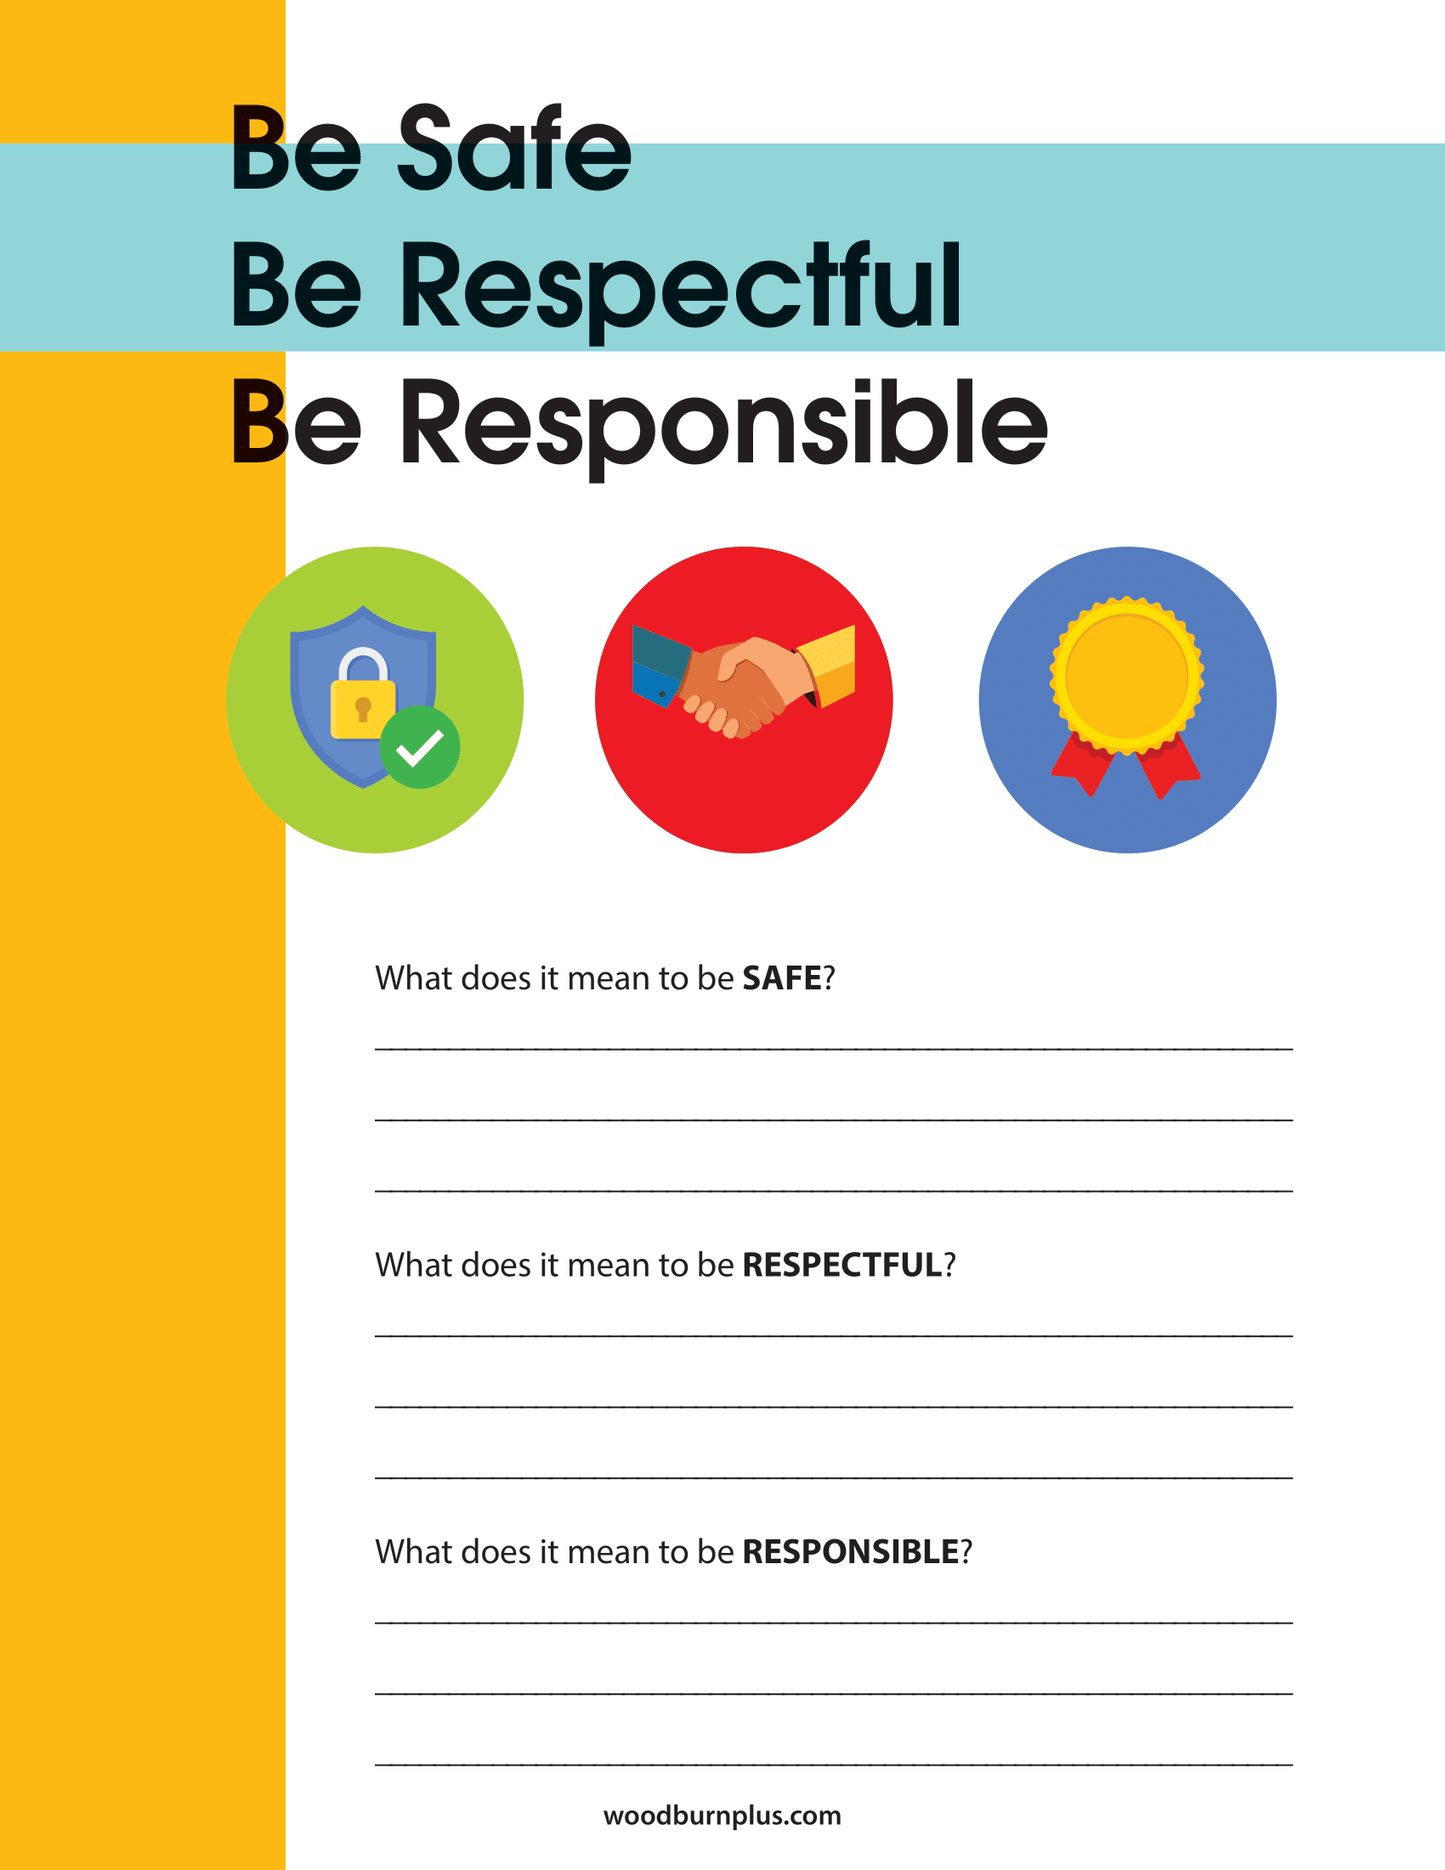 Be Safe, Be Respectful, Be Responsible